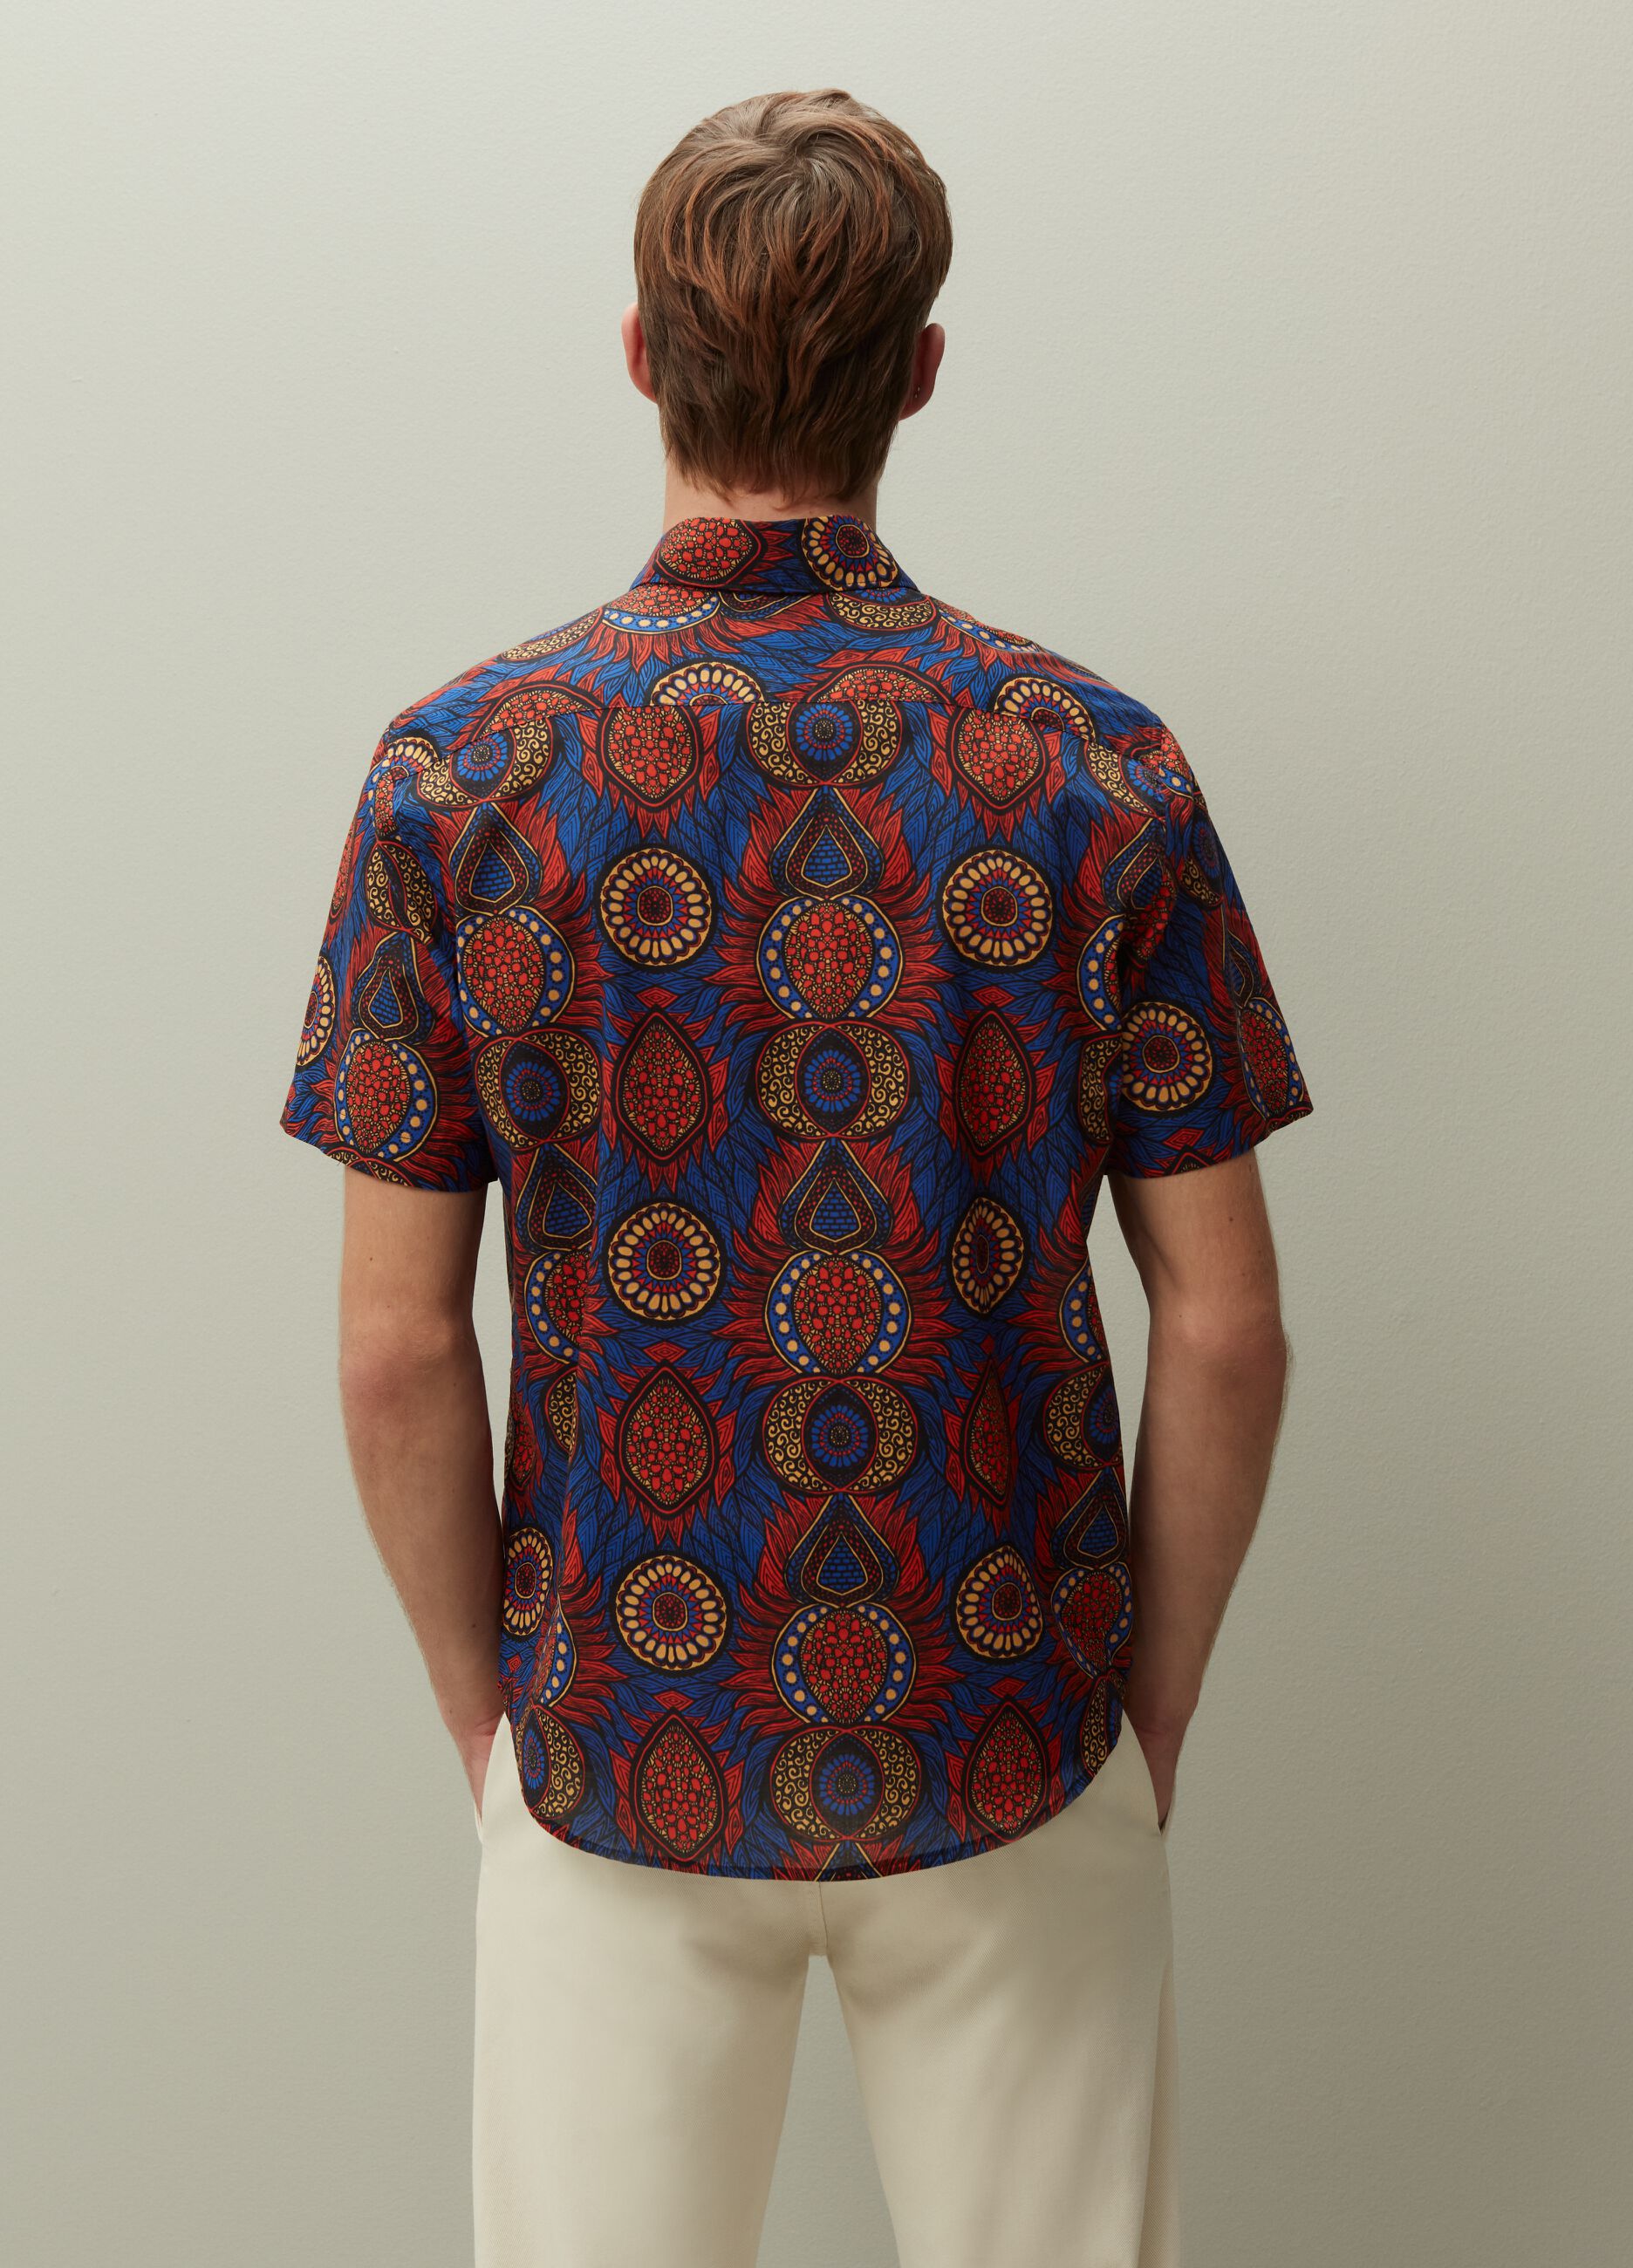 Short-sleeved shirt with ethnic pattern